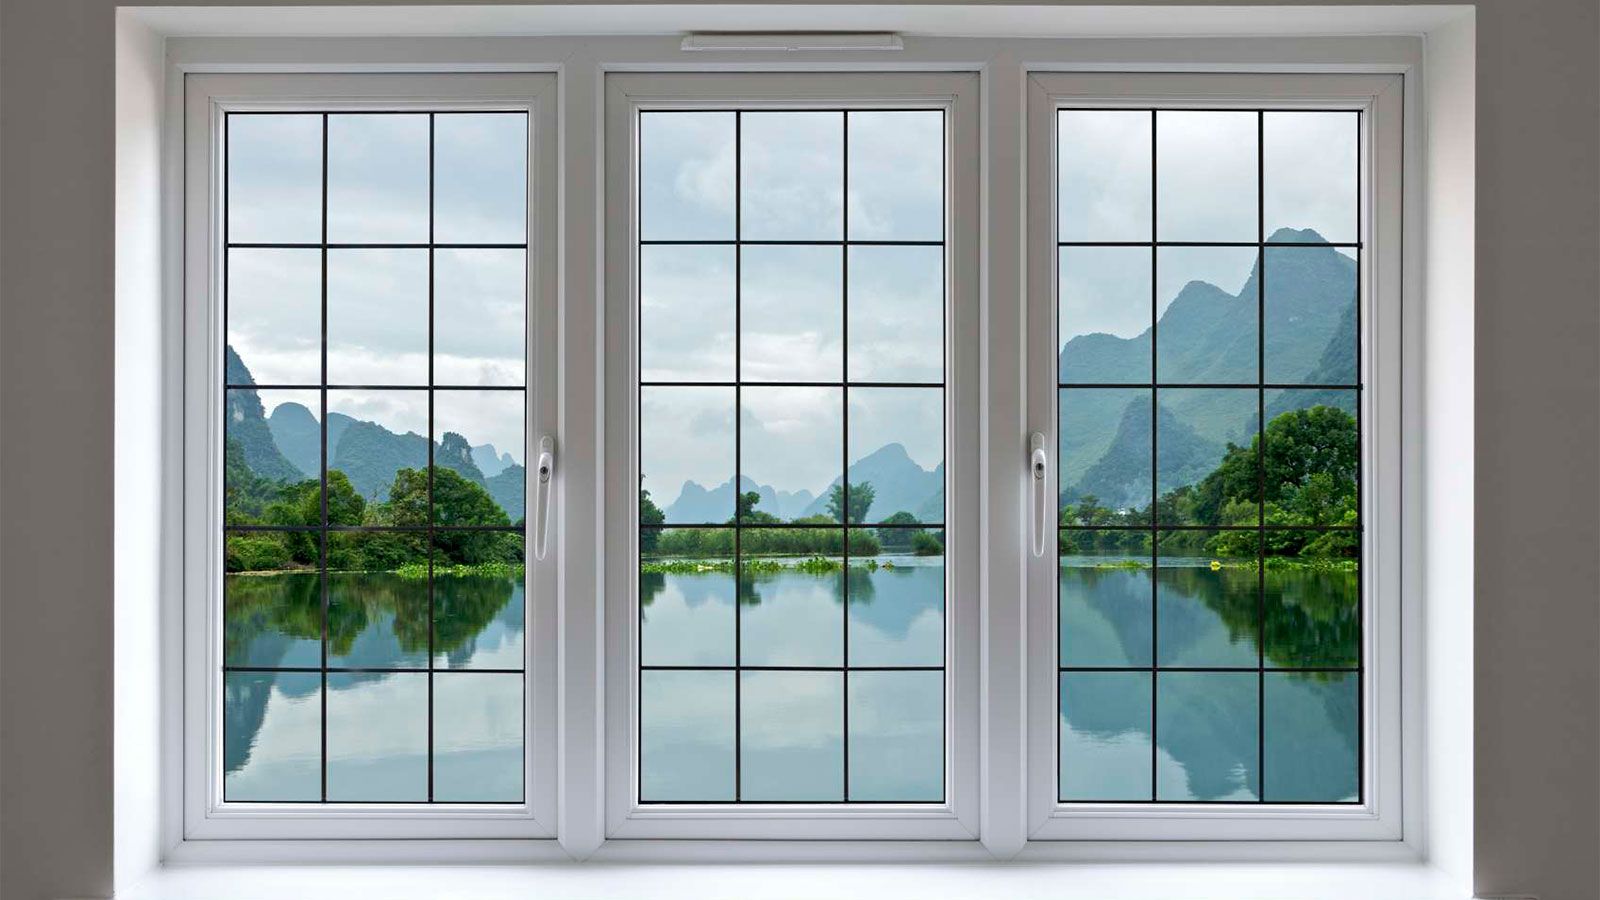 Advantages and disadvantages of wooden, plastic and aluminum windows